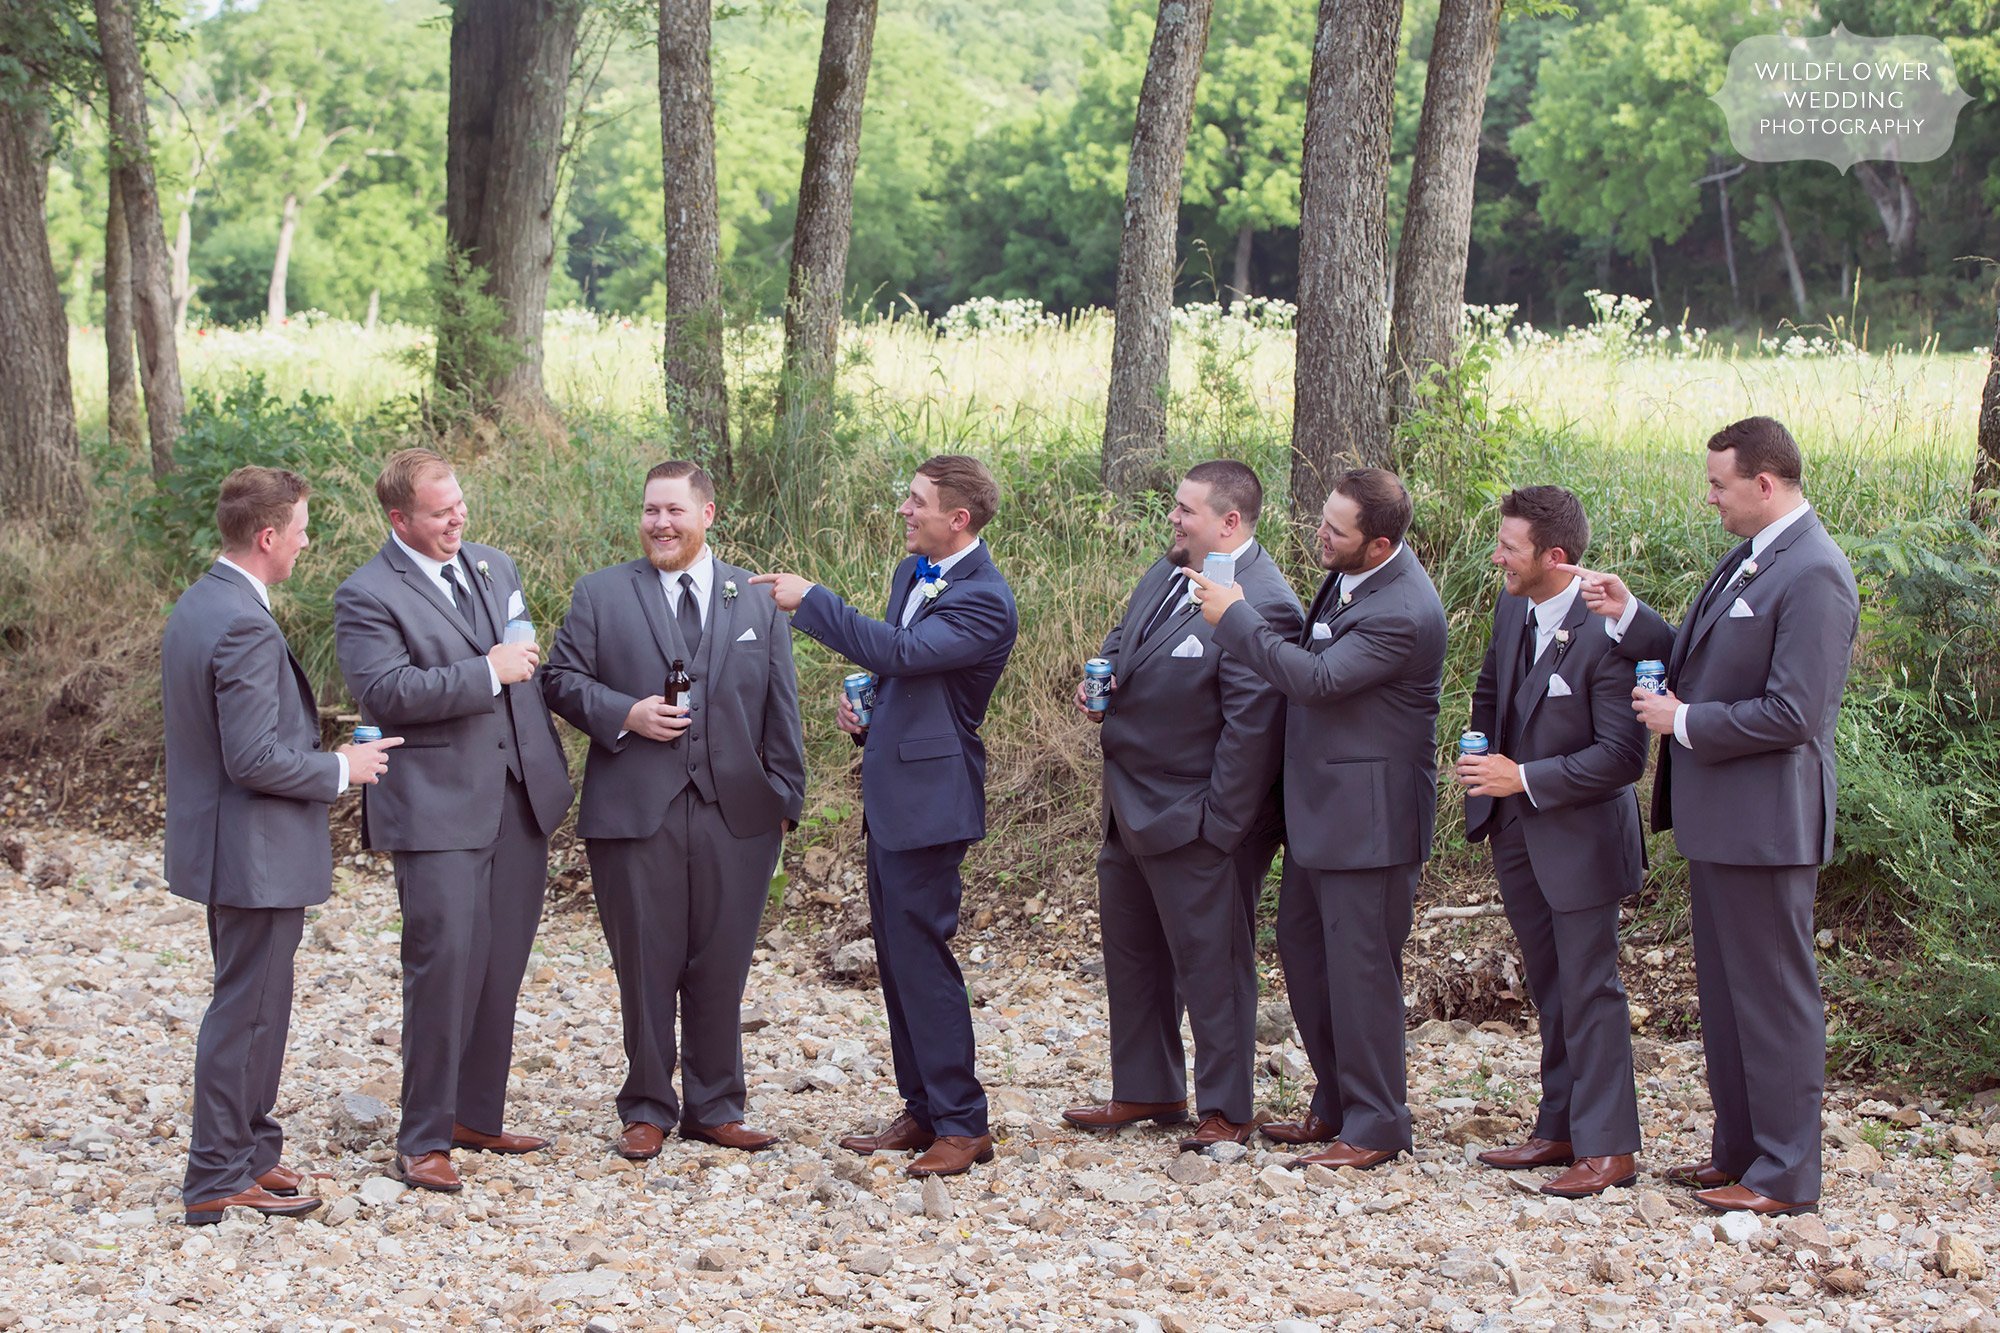 Funny photo of the groomsmen in the creek at this country wedding in MO.